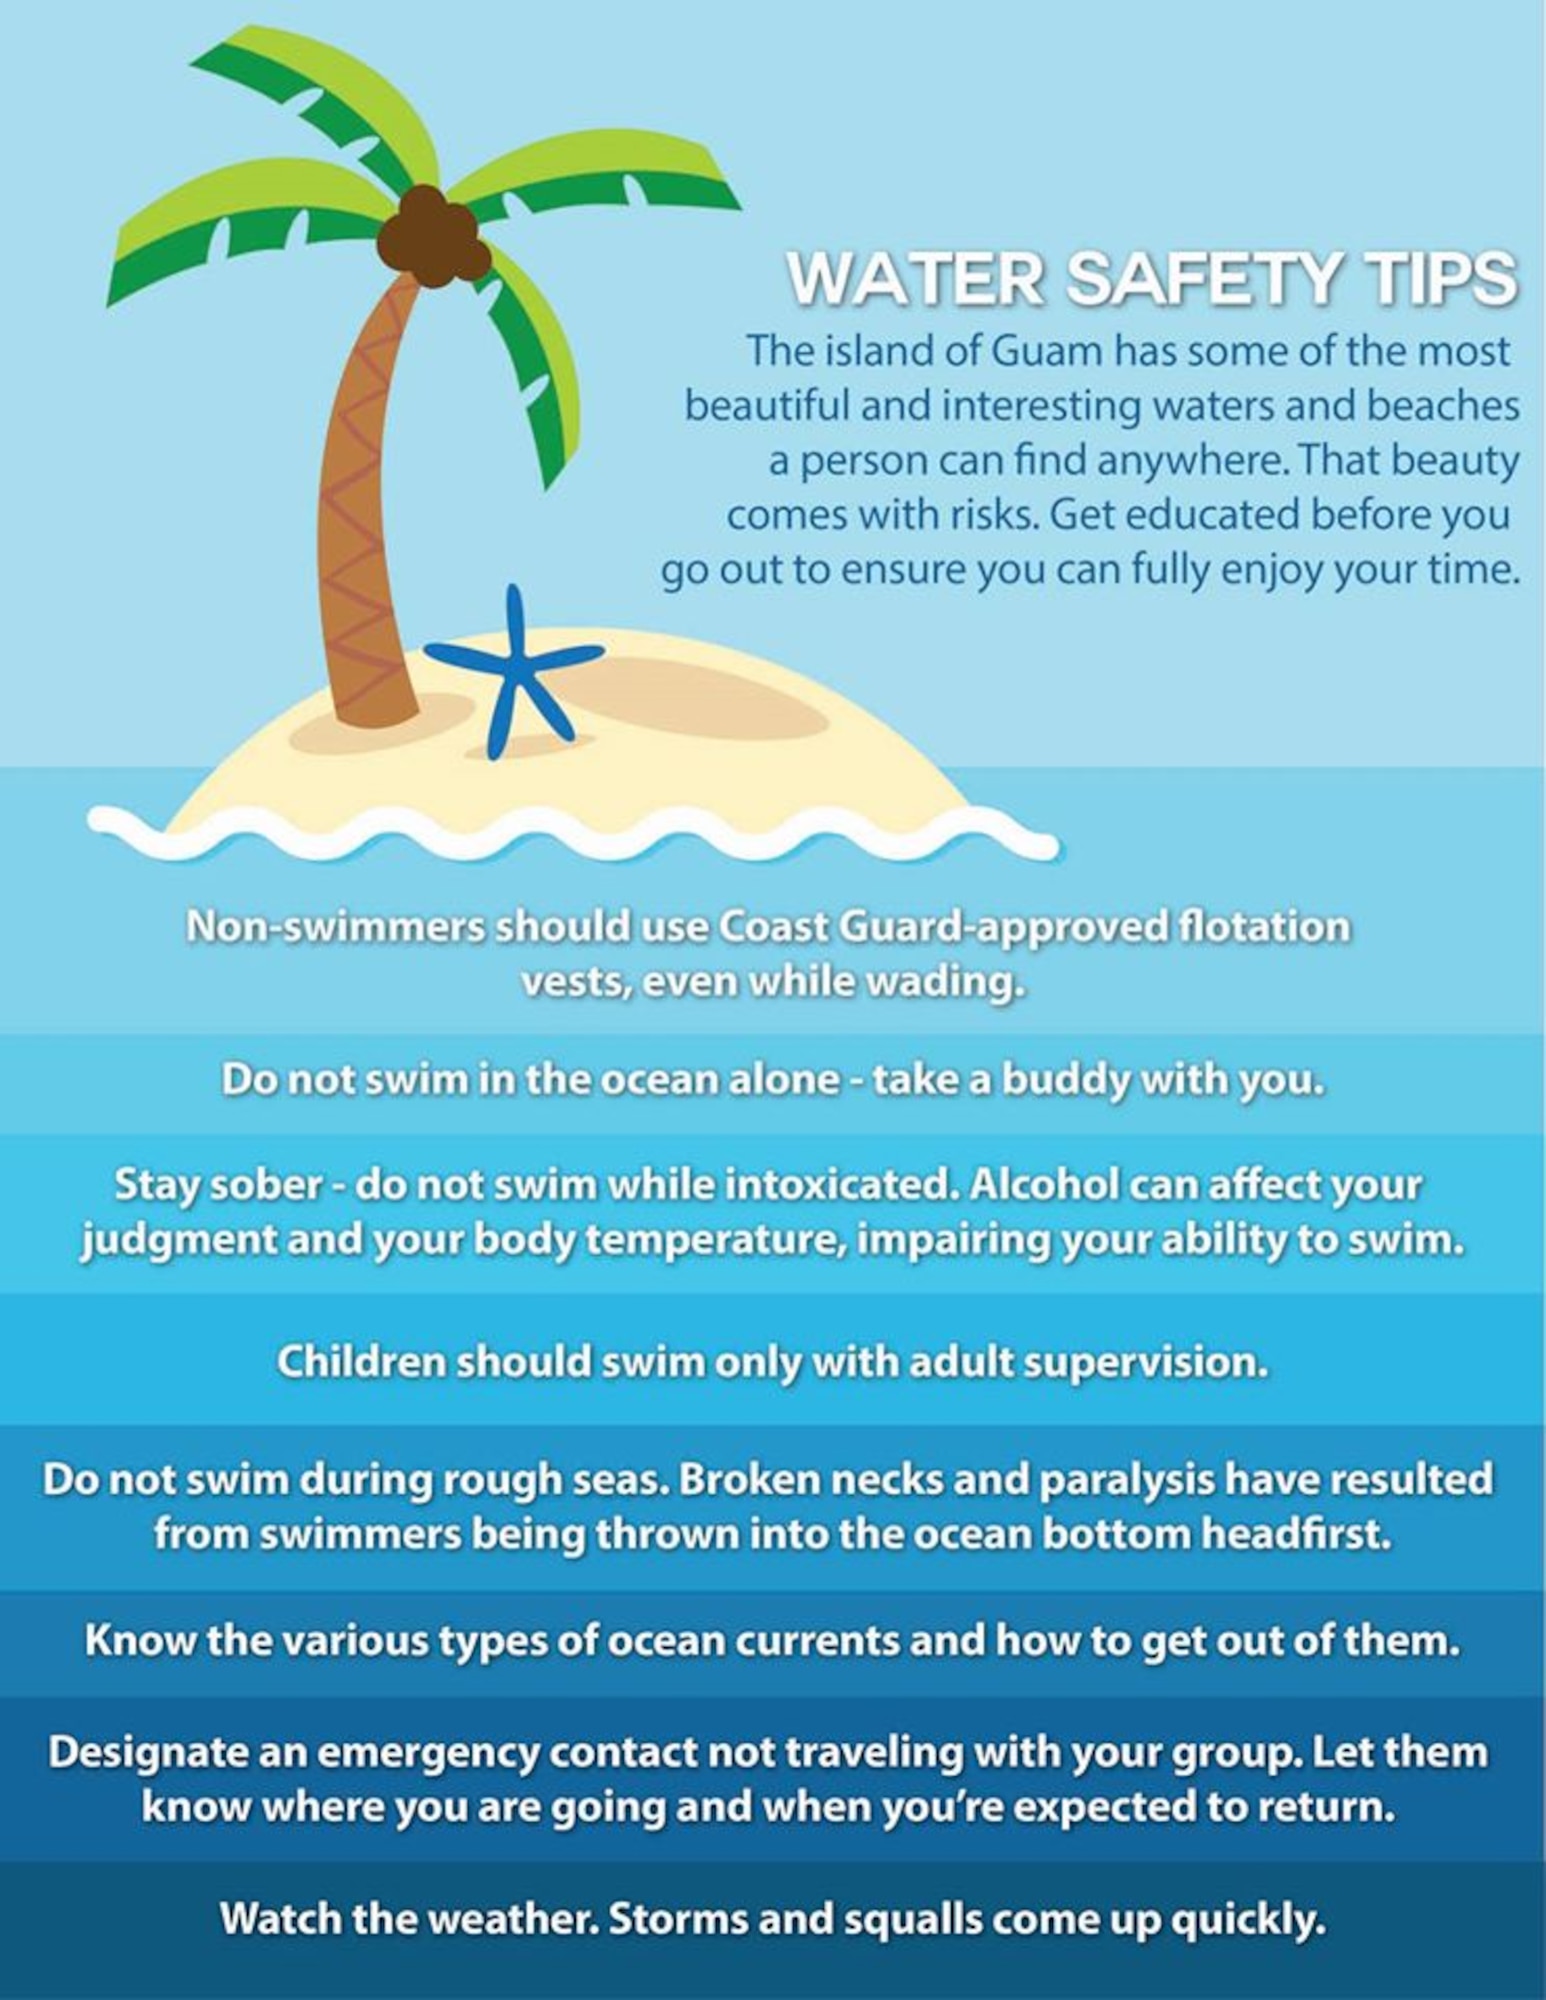 Always keep safety in mind when exploring the island of Guam. Slather on the sunscreen, drink plenty of water, watch out for your fellow wingman, and drink responsibly. Please review this water safety tips graphic for ways to enjoy Guam's waters and beaches while remaining safe. (U.S. Air Force graphic by Senior Airman Katrina M. Brisbin/Released)